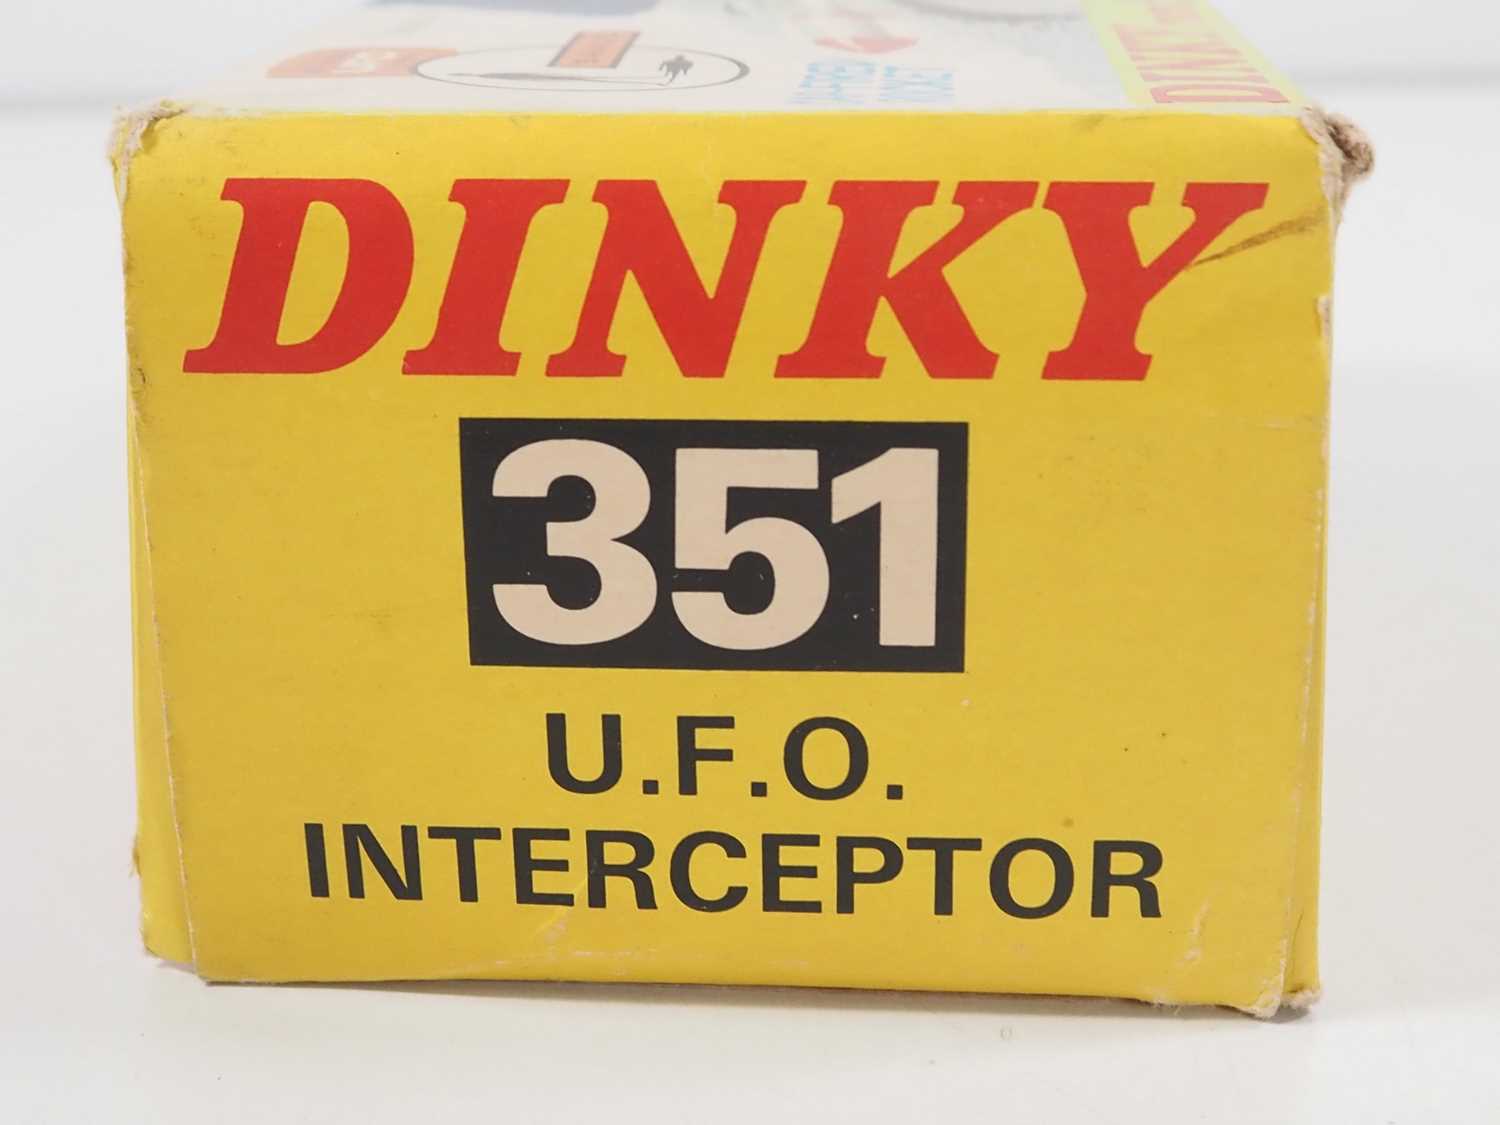 A DINKY 351 Gerry Anderson's 'UFO' Interceptor in metallic green with missile, pictorial card box - Image 10 of 10